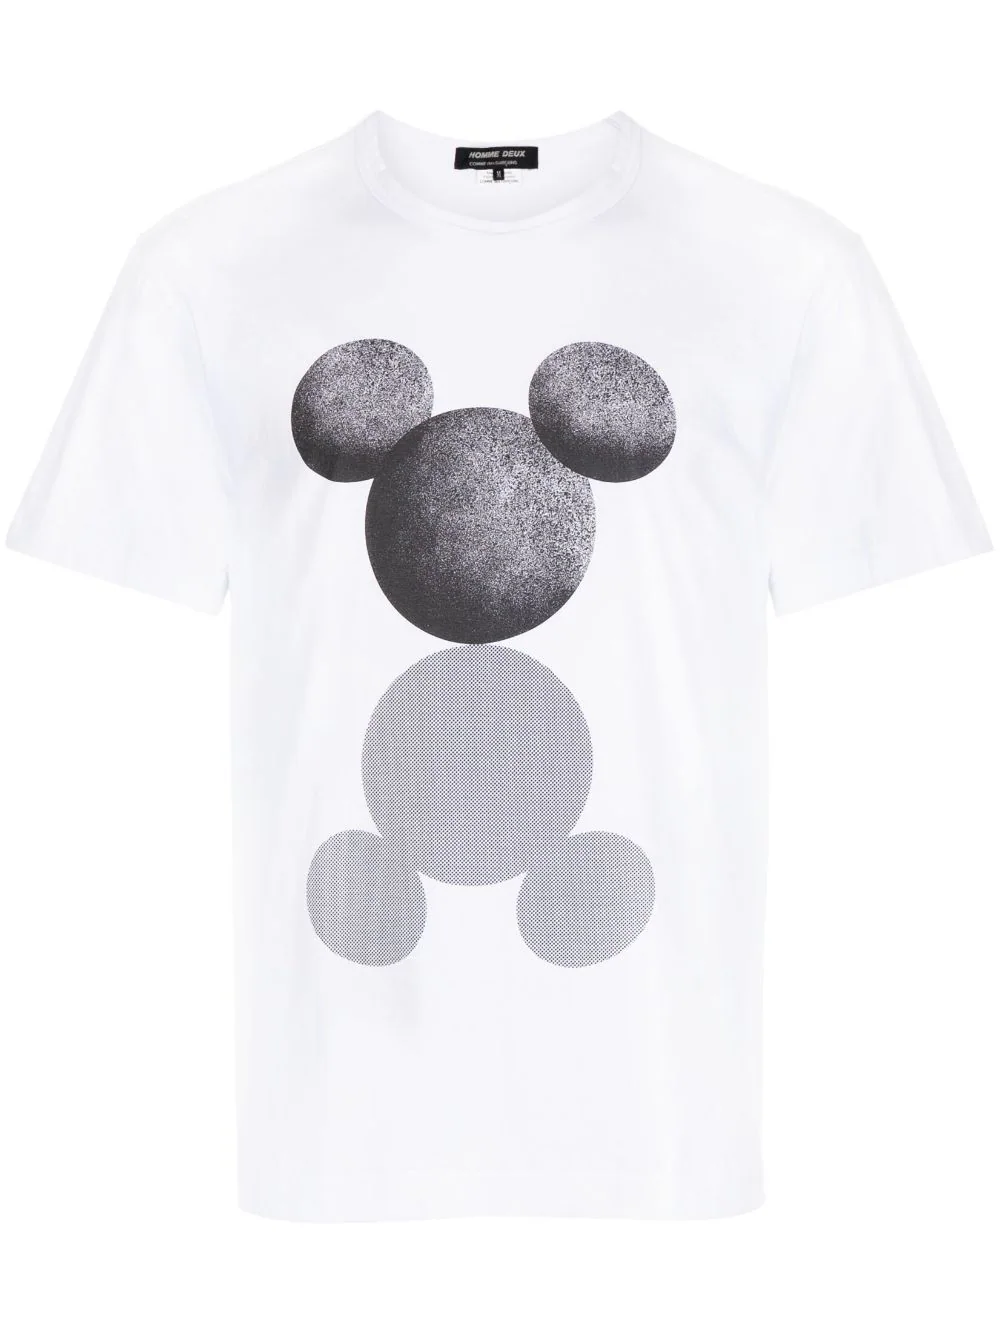 COMME-des-GARCONS-HOMME-DEUX-Mickey-Head-Tee-White-1